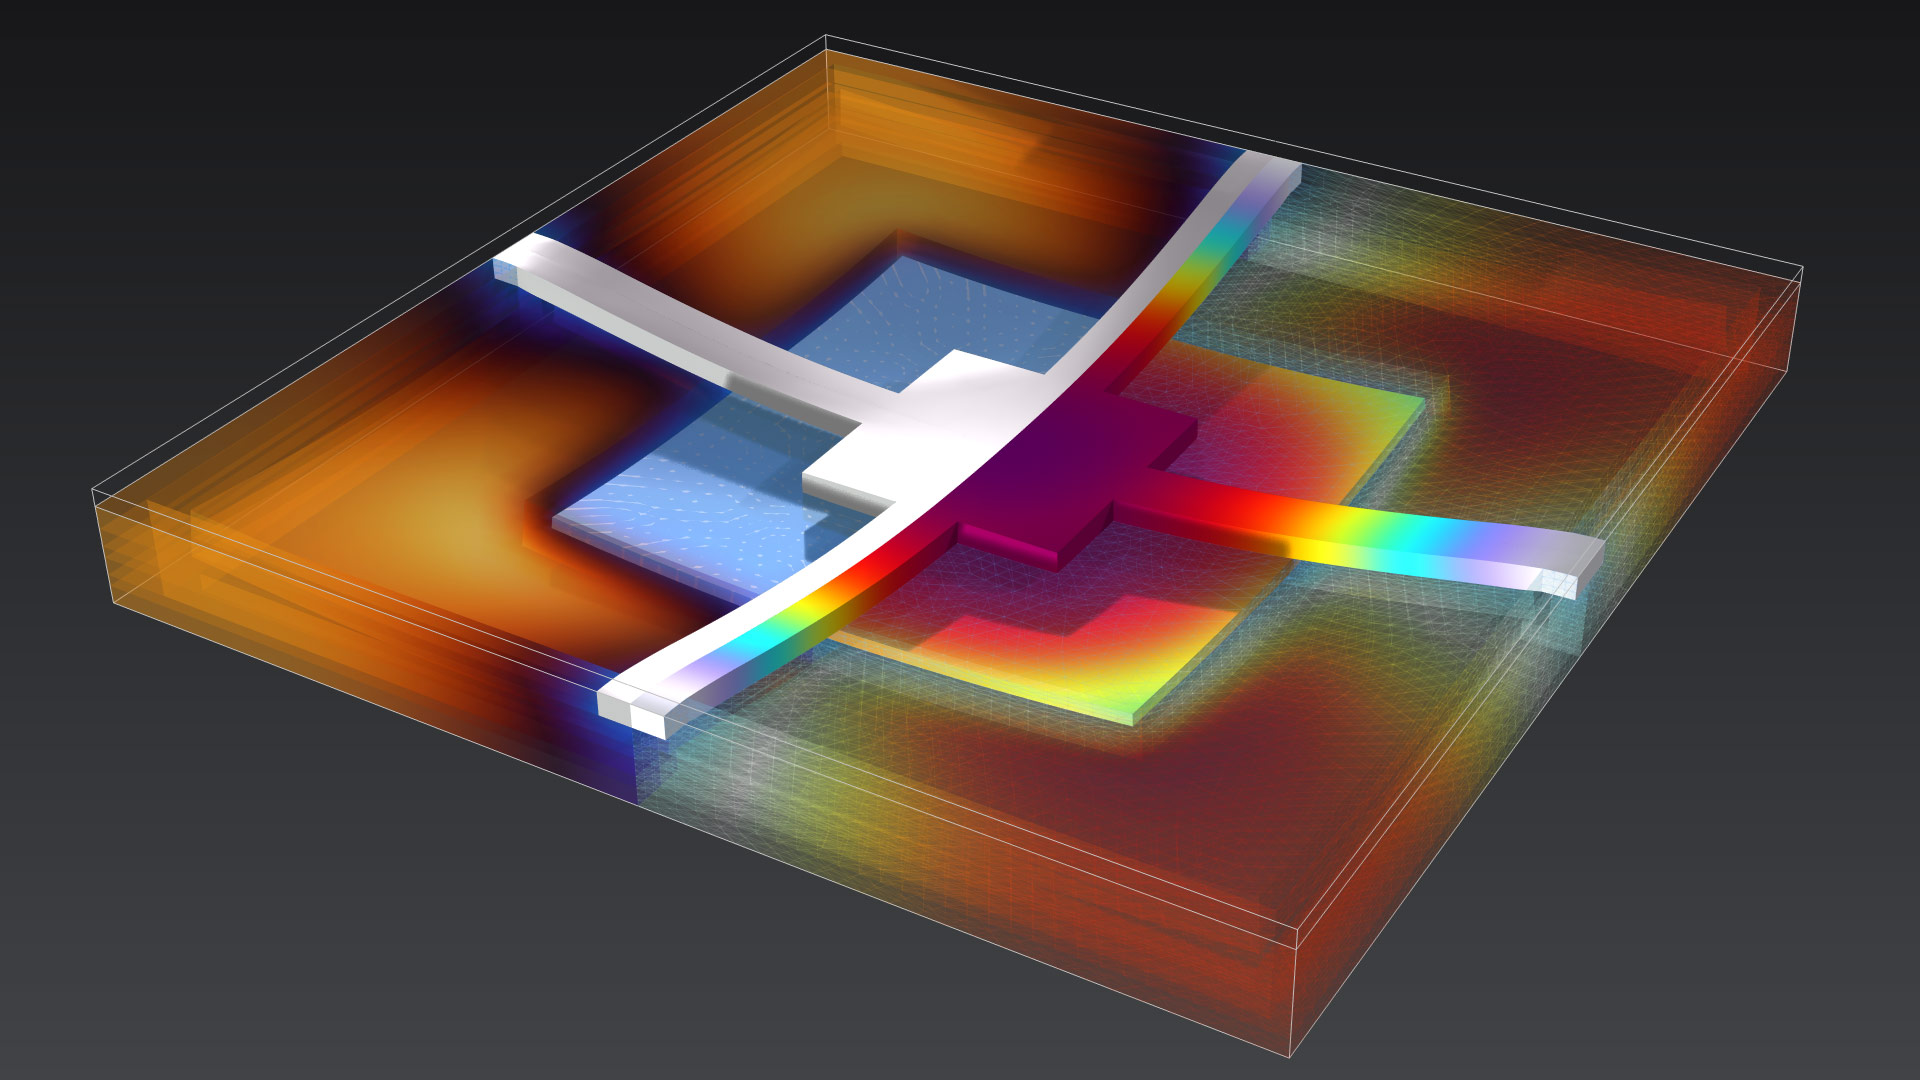 A transducer model in the Thermal Wave and Prism color tables.